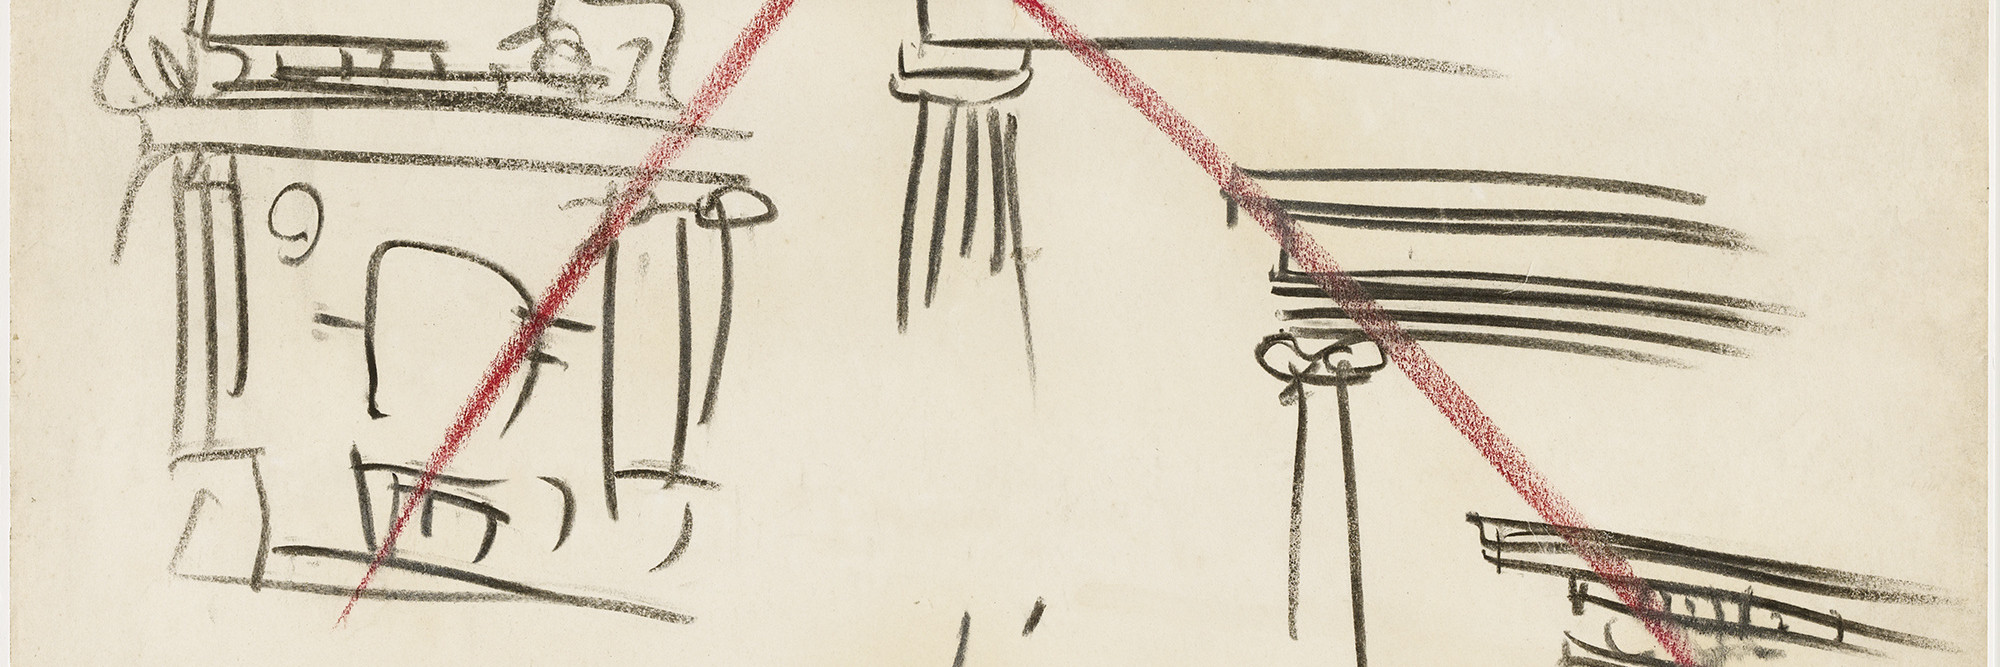 Le Corbusier (Charles-Édouard Jeanneret ). “Ceci n’est pas l’architecture” drawing from Buenos Aires Lecture. 1929. Charcoal and crayon on paper, 39¾ × 25 9/16″ (101 × 65 cm). Gift of Agnes Gund in honor of Patricia Phelps de Cisneros